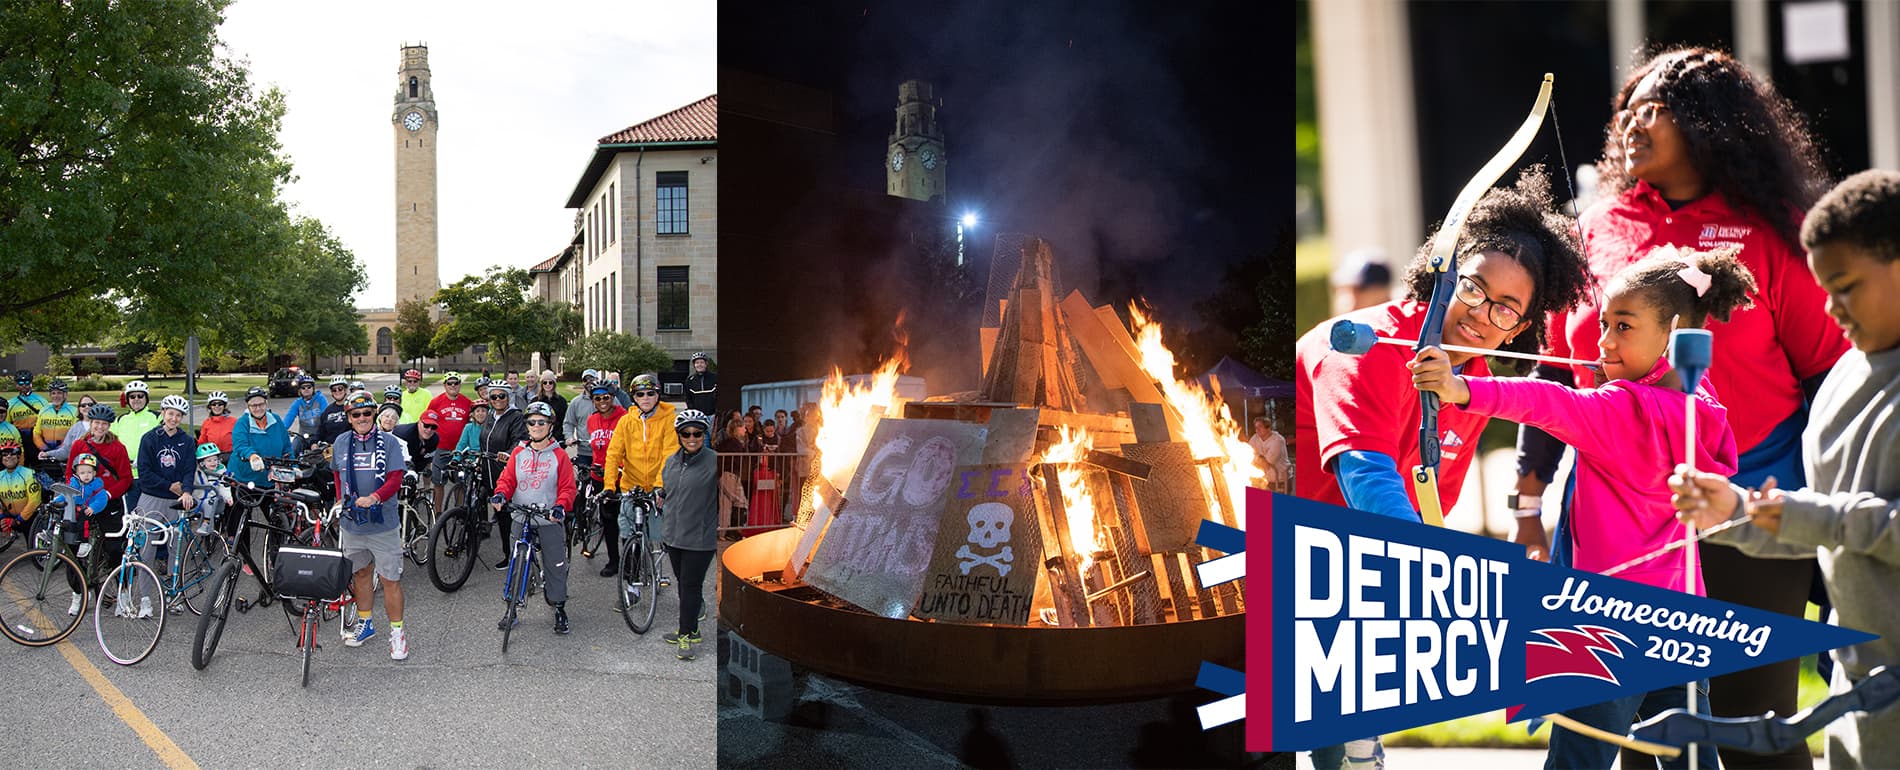 Three photos featuring at left, bike riders with their bikes in front of the clock tower outdoors on the McNichols Campus, a bonfire at night time in the middle with people surrounding it and at right, students helping two children shoot toy bow and arrows outdoors during Homecoming. Also featuring a Detroit Mercy Homecoming 2023 logo.